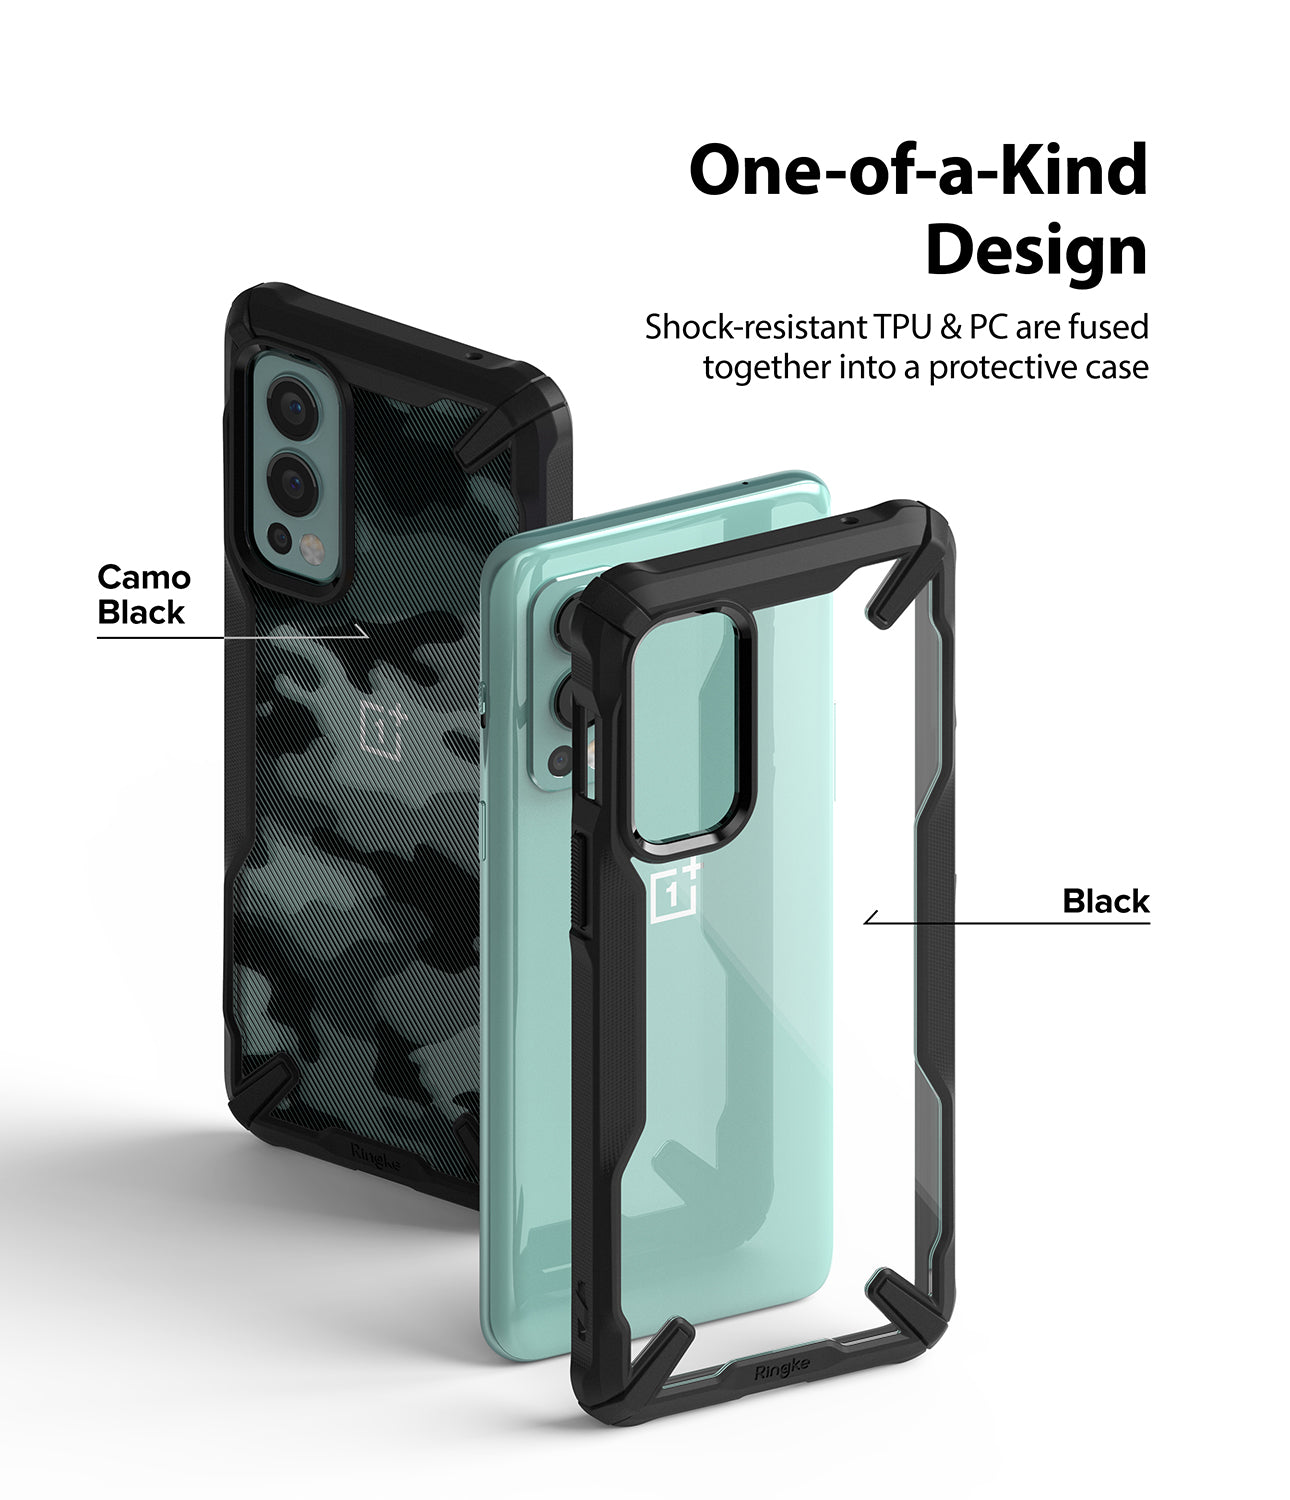 OnePlus Nord 2 Case | Fusion-X - Ringke Official Store